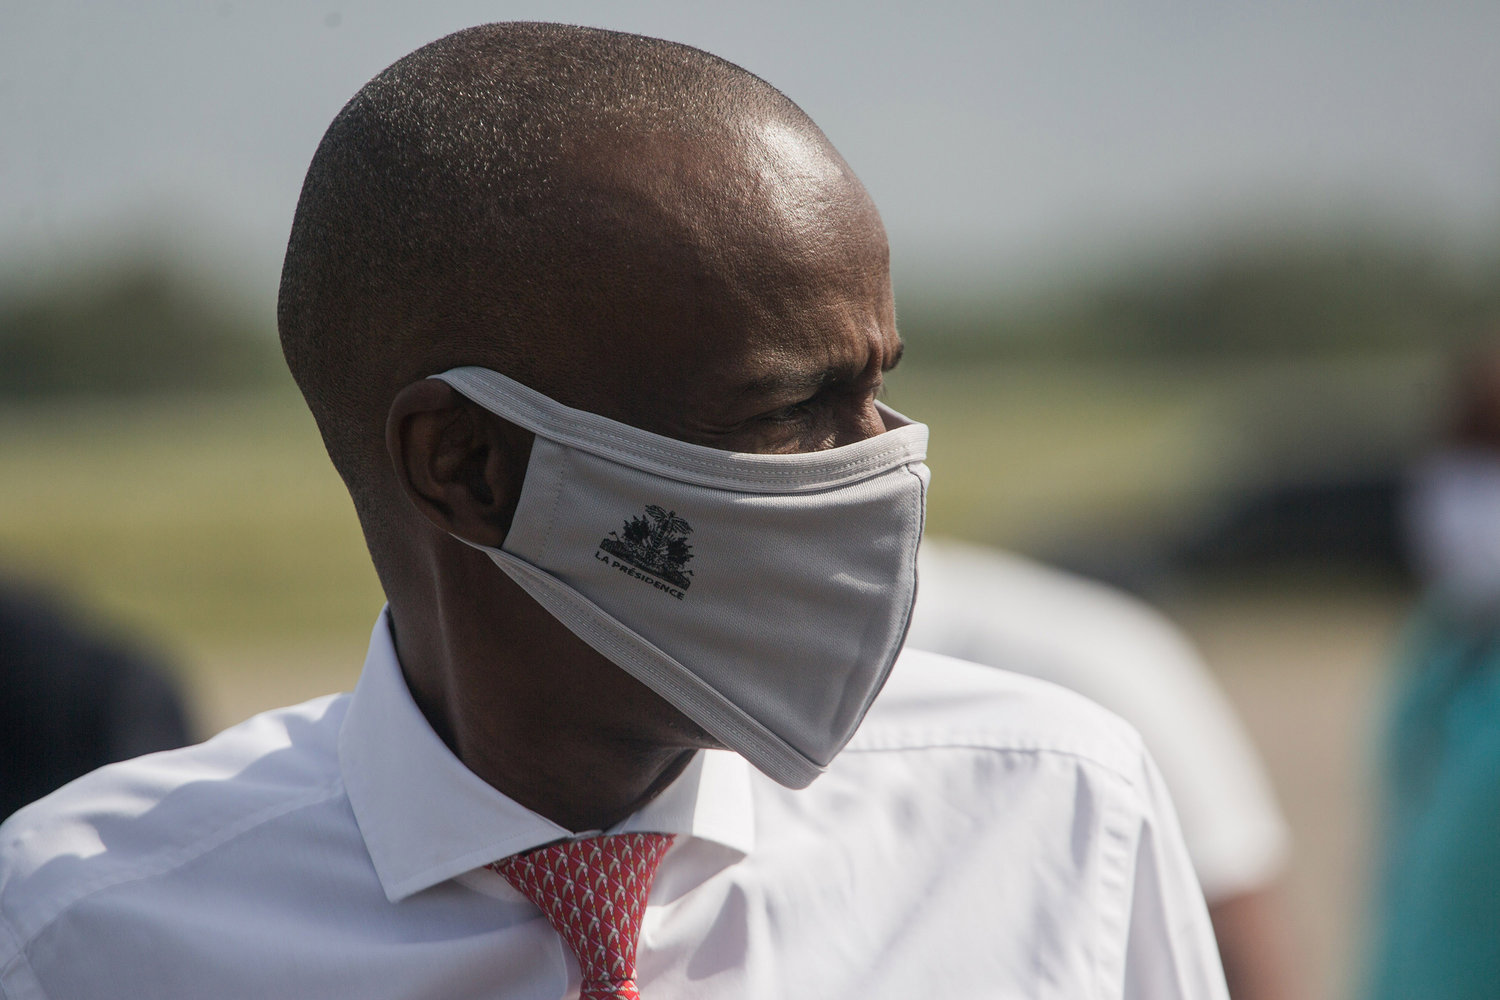 Haitian President Jovenel Moise walks on the tarmac of Toussaint Louverture International Airport in Port-au-Prince, Haiti, on May 7, 2020, as coronavirus aid from China arrives in a cargo plane.